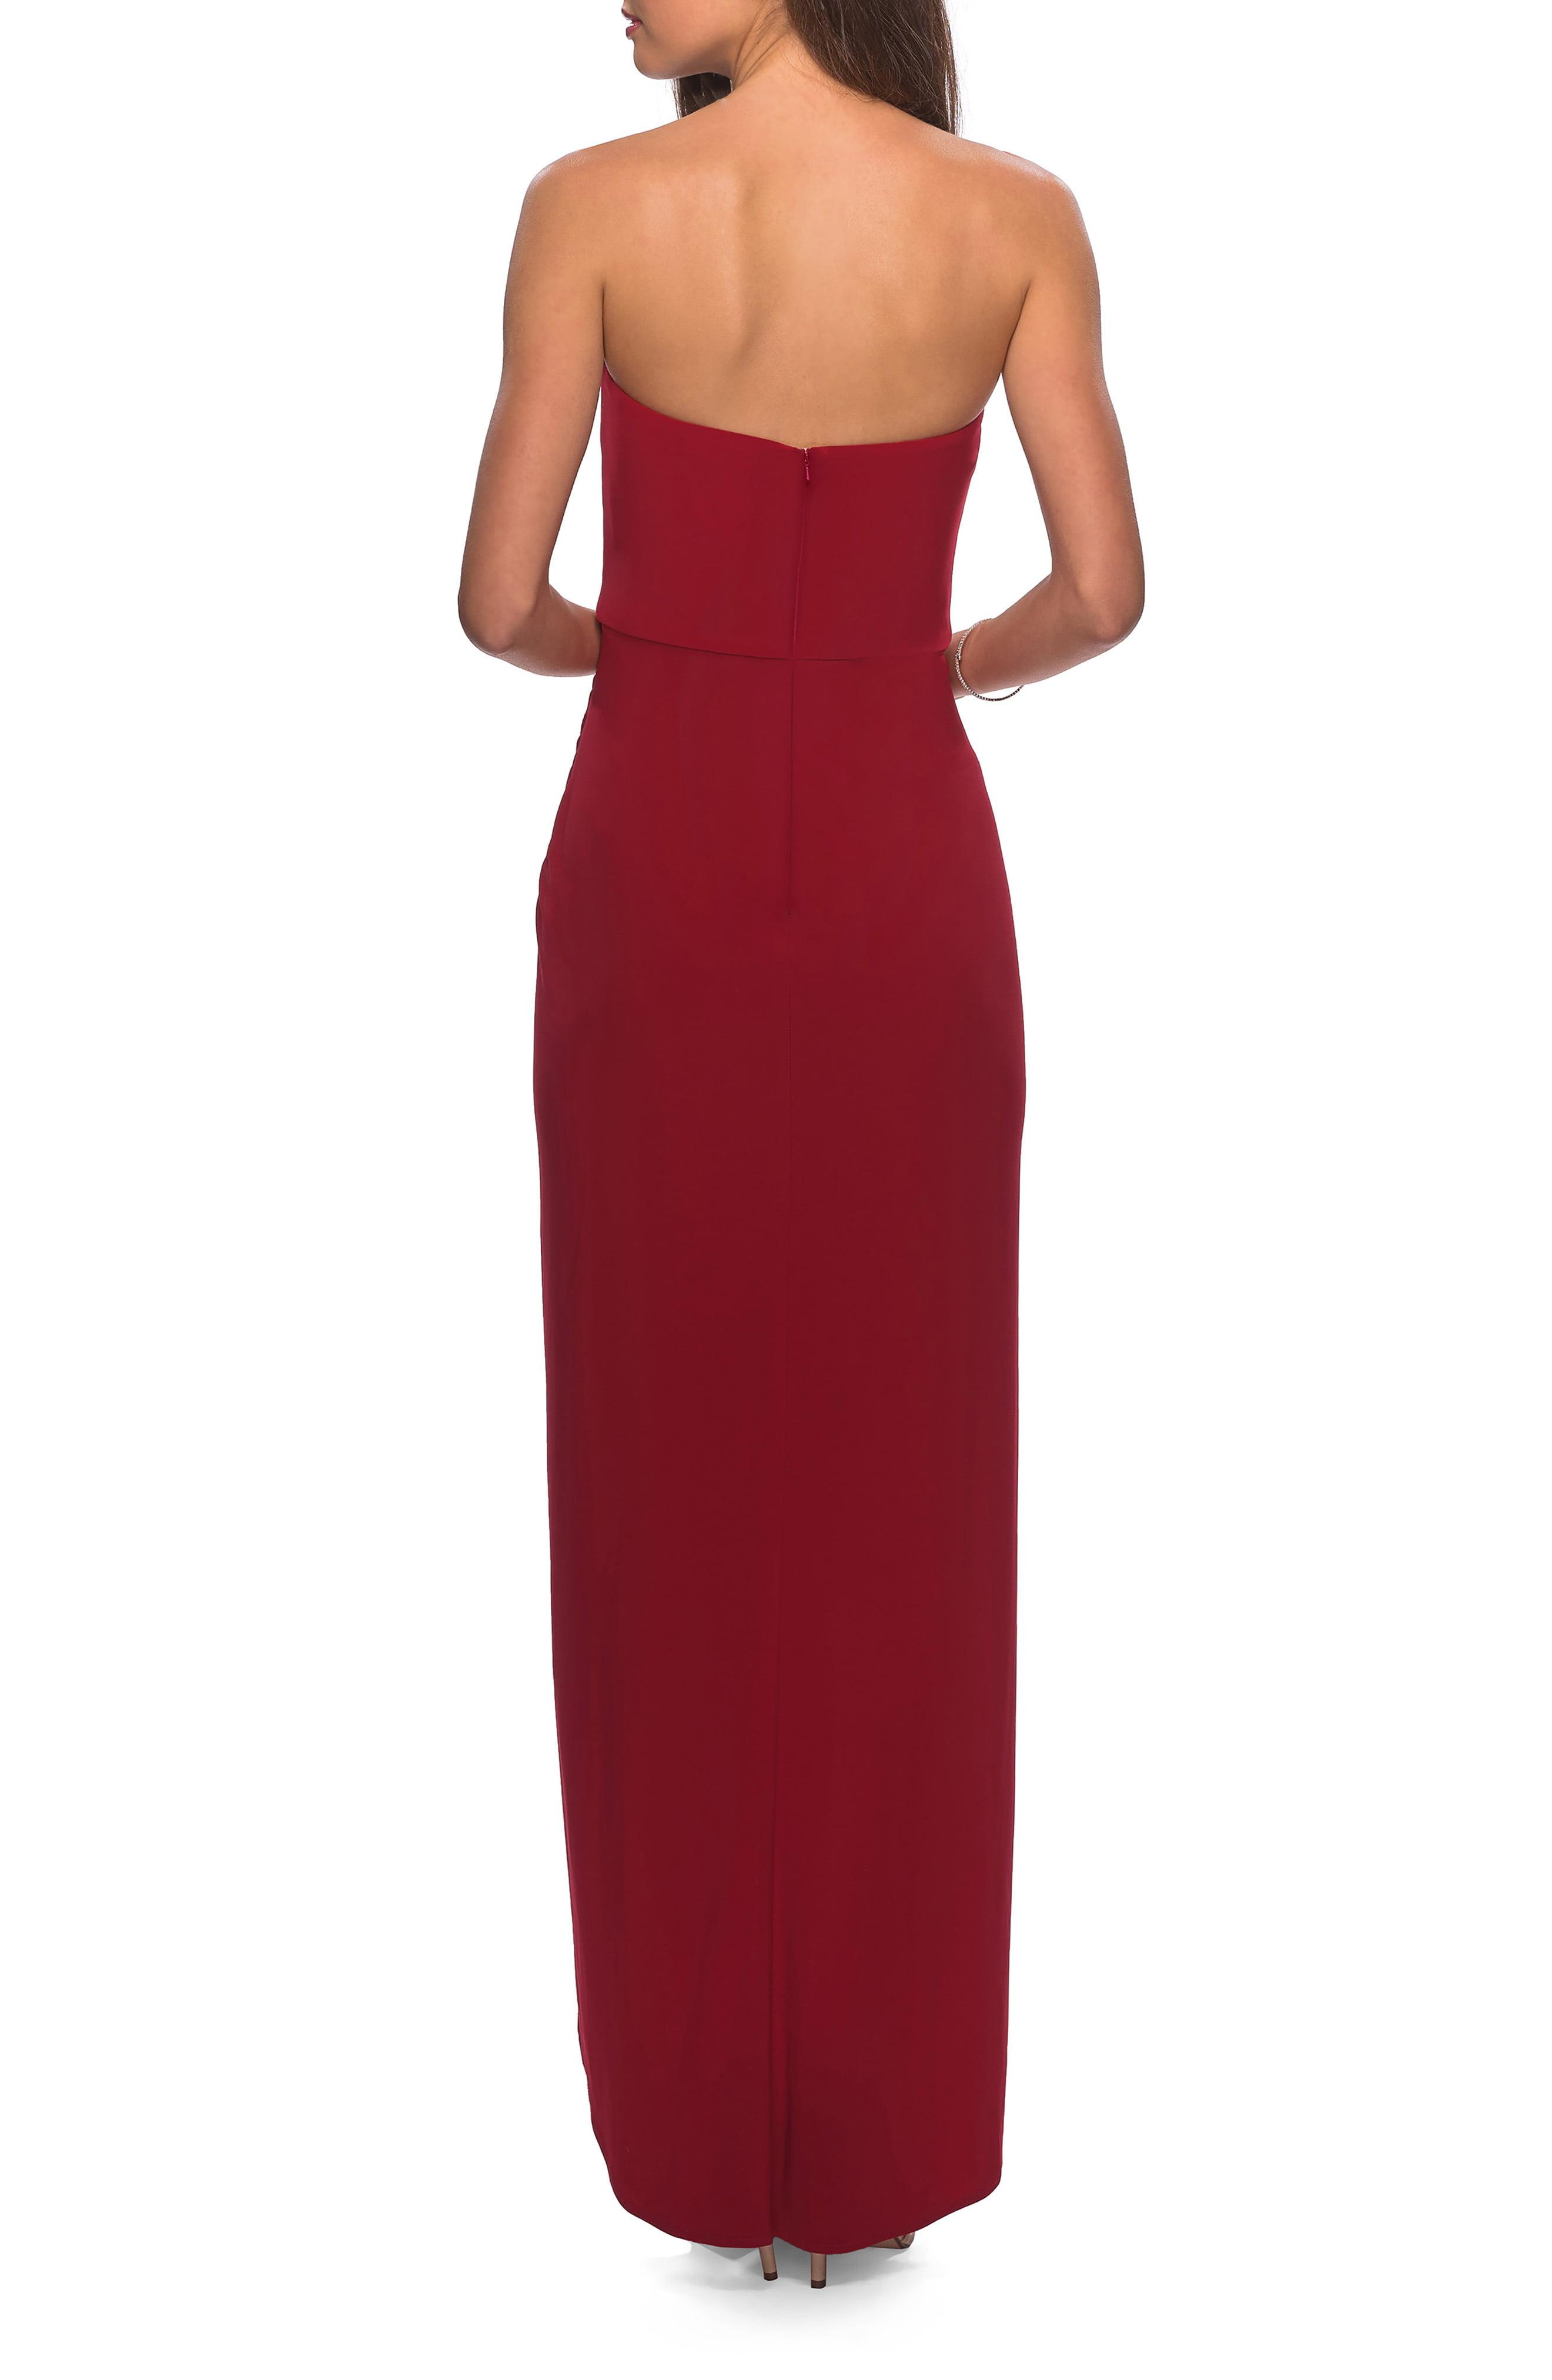 La Femme Strapless Ruched Soft Jersey Gown in Red - Lyst